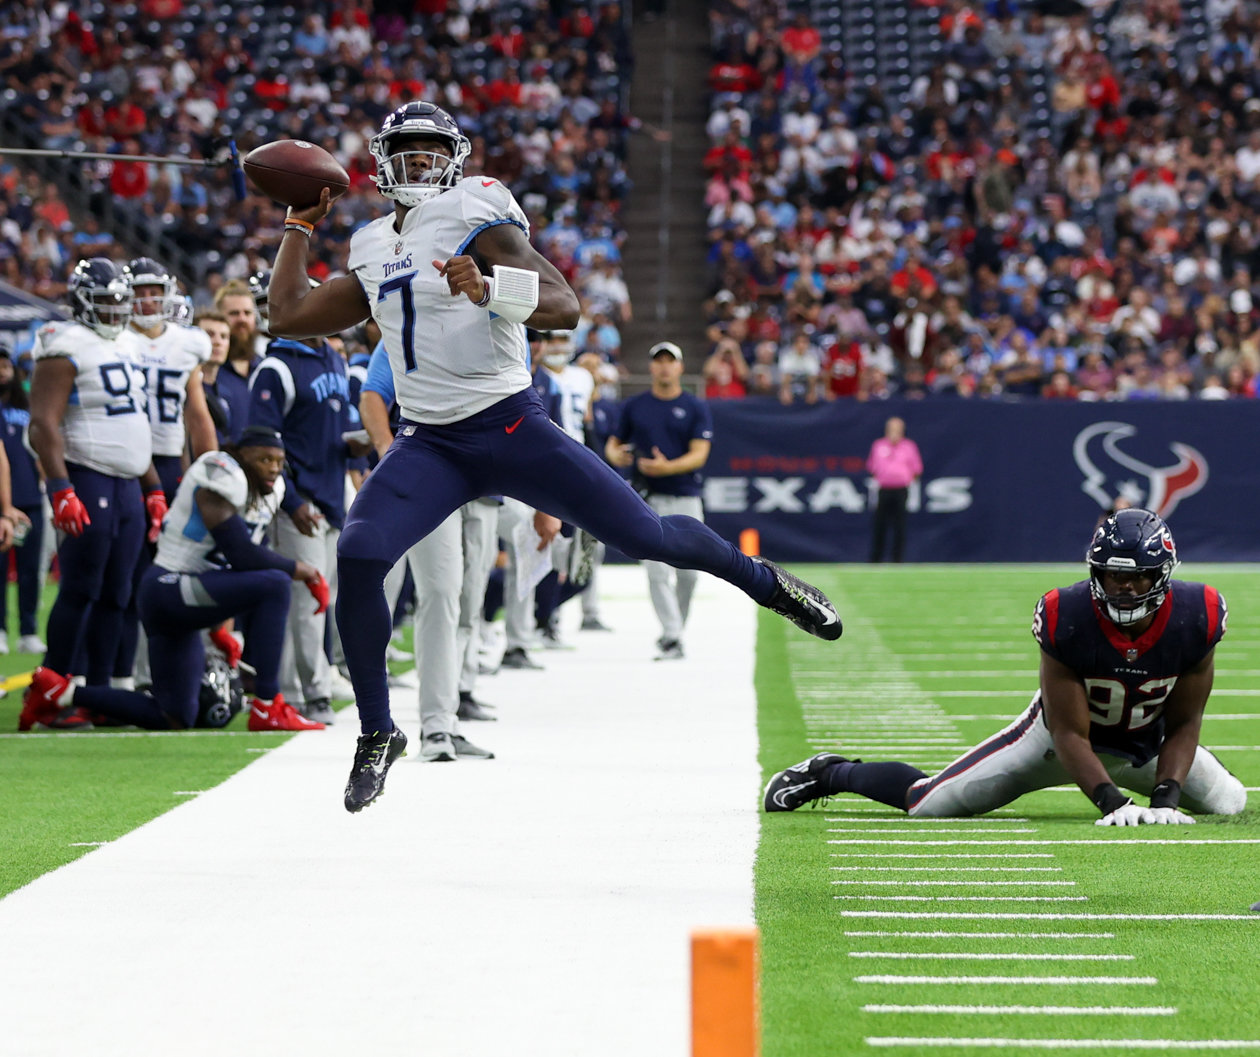 Titans quarterback Malik Willis (7) passes the ball downfield while leaping out of bounds during an NFL game between the Texans and the Titans on Oct. 30, 2022 in Houston.